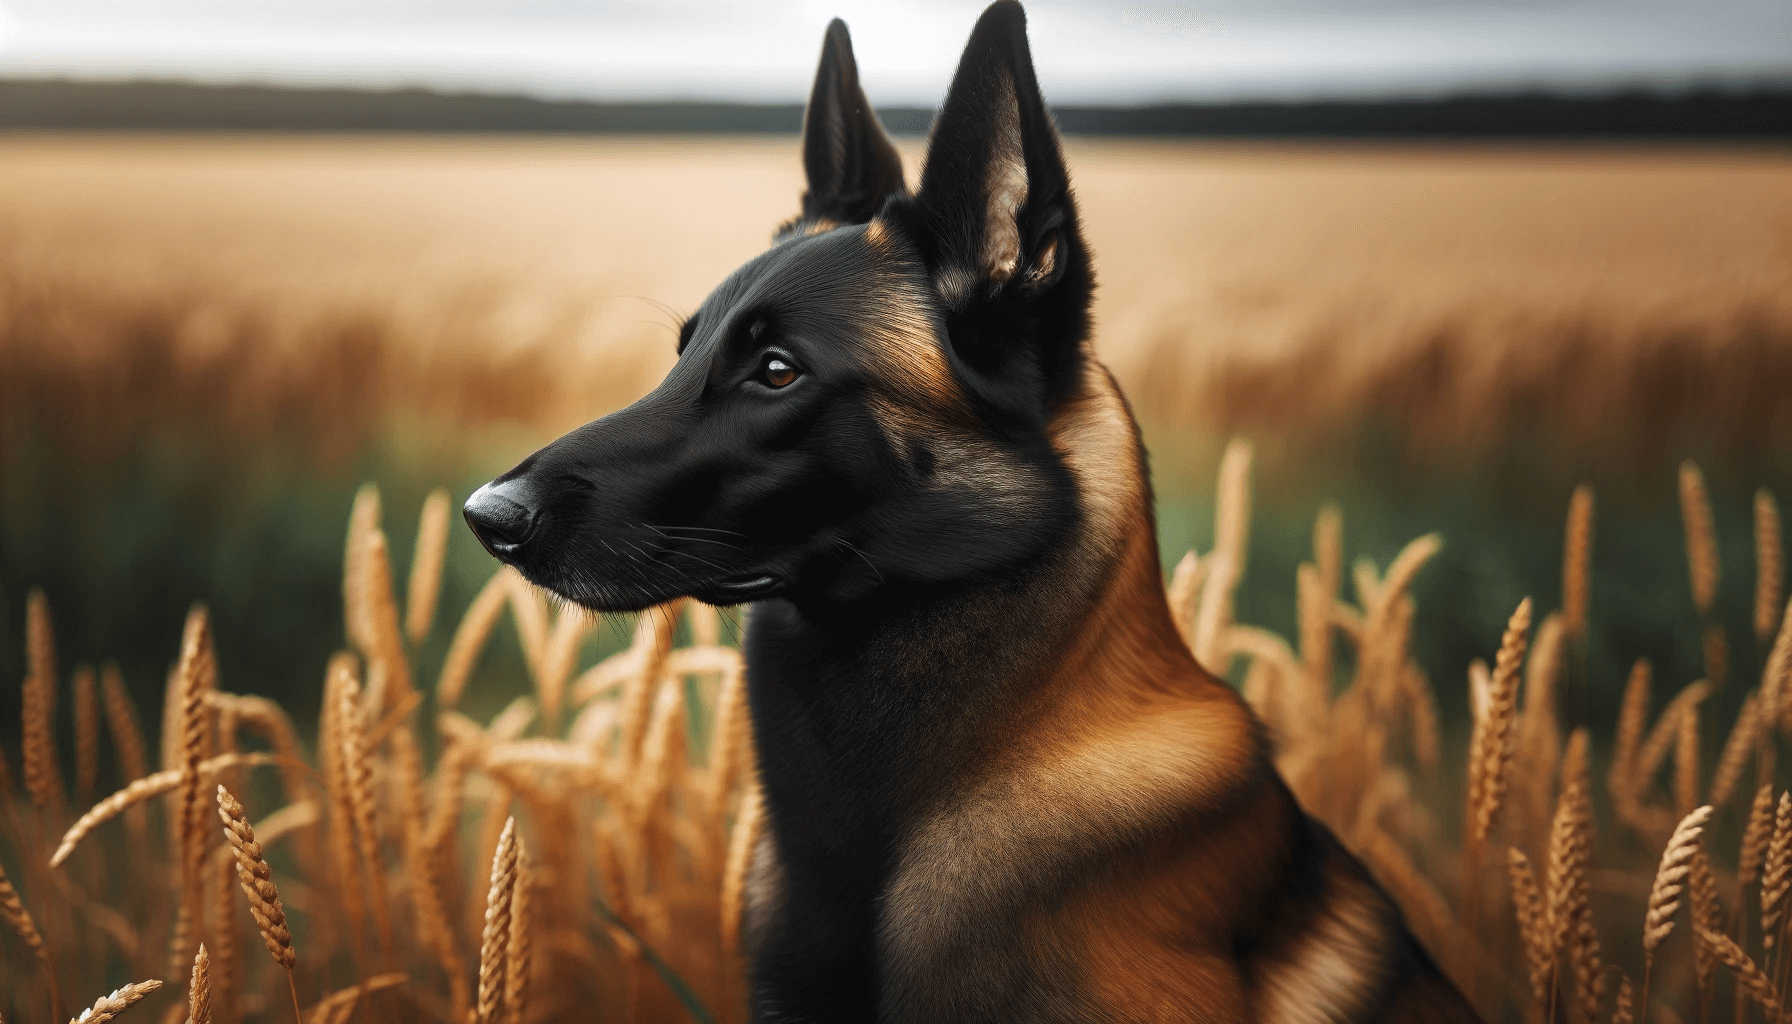 Rare Black Belgian Malinois in a field with a black and tan coat.